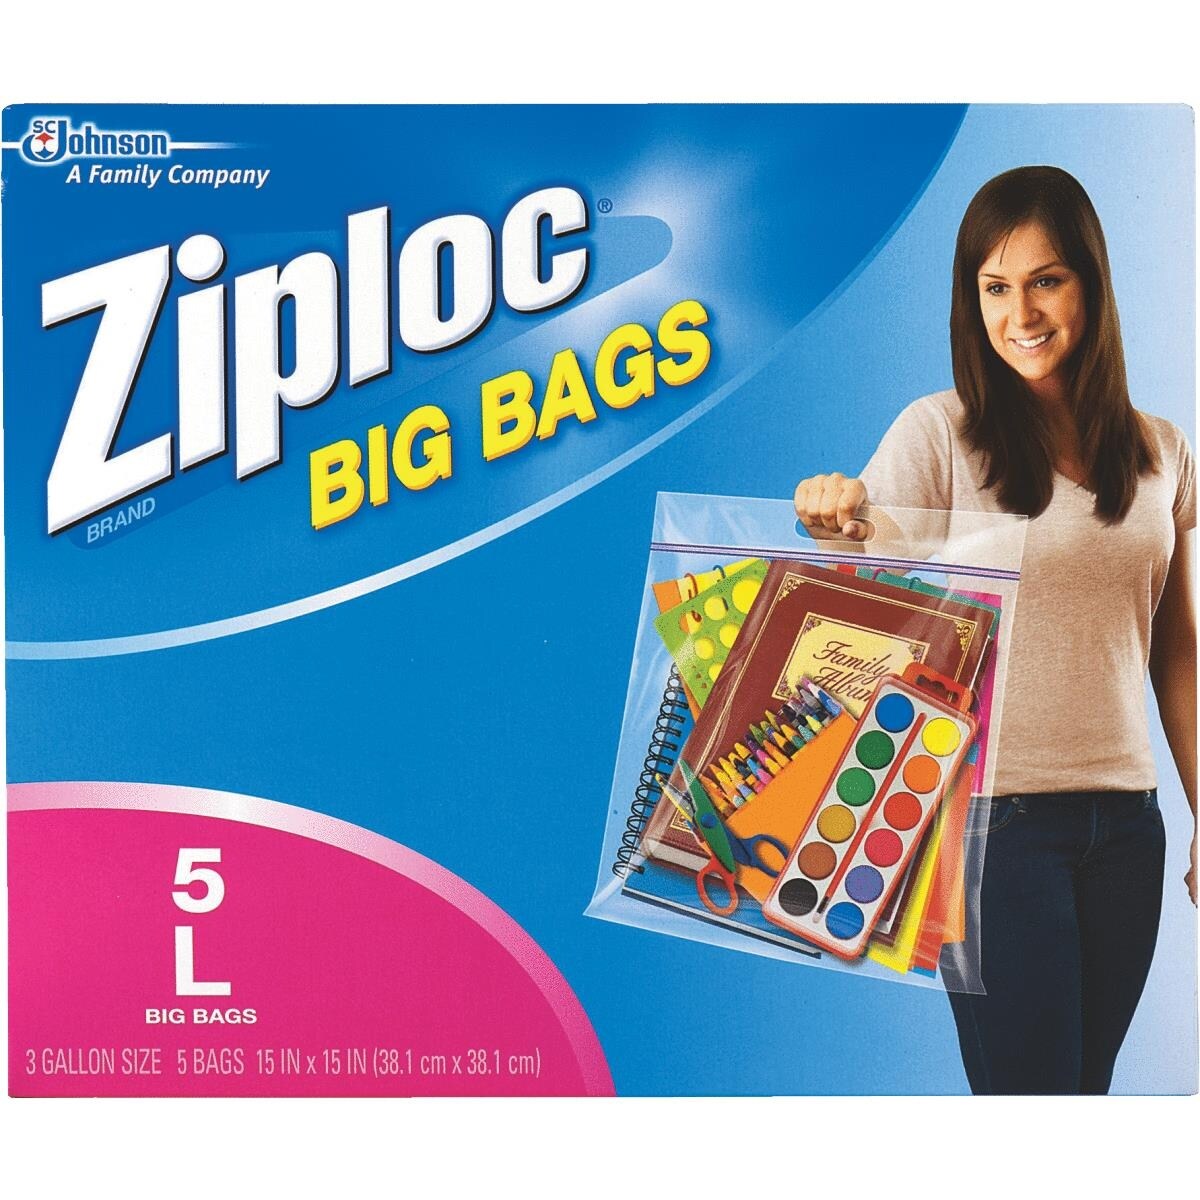 Ziploc 71420 Large Round Containers & Lids with One Press Seal, 48 Oz,  2-Count - Bed Bath & Beyond - 27606855